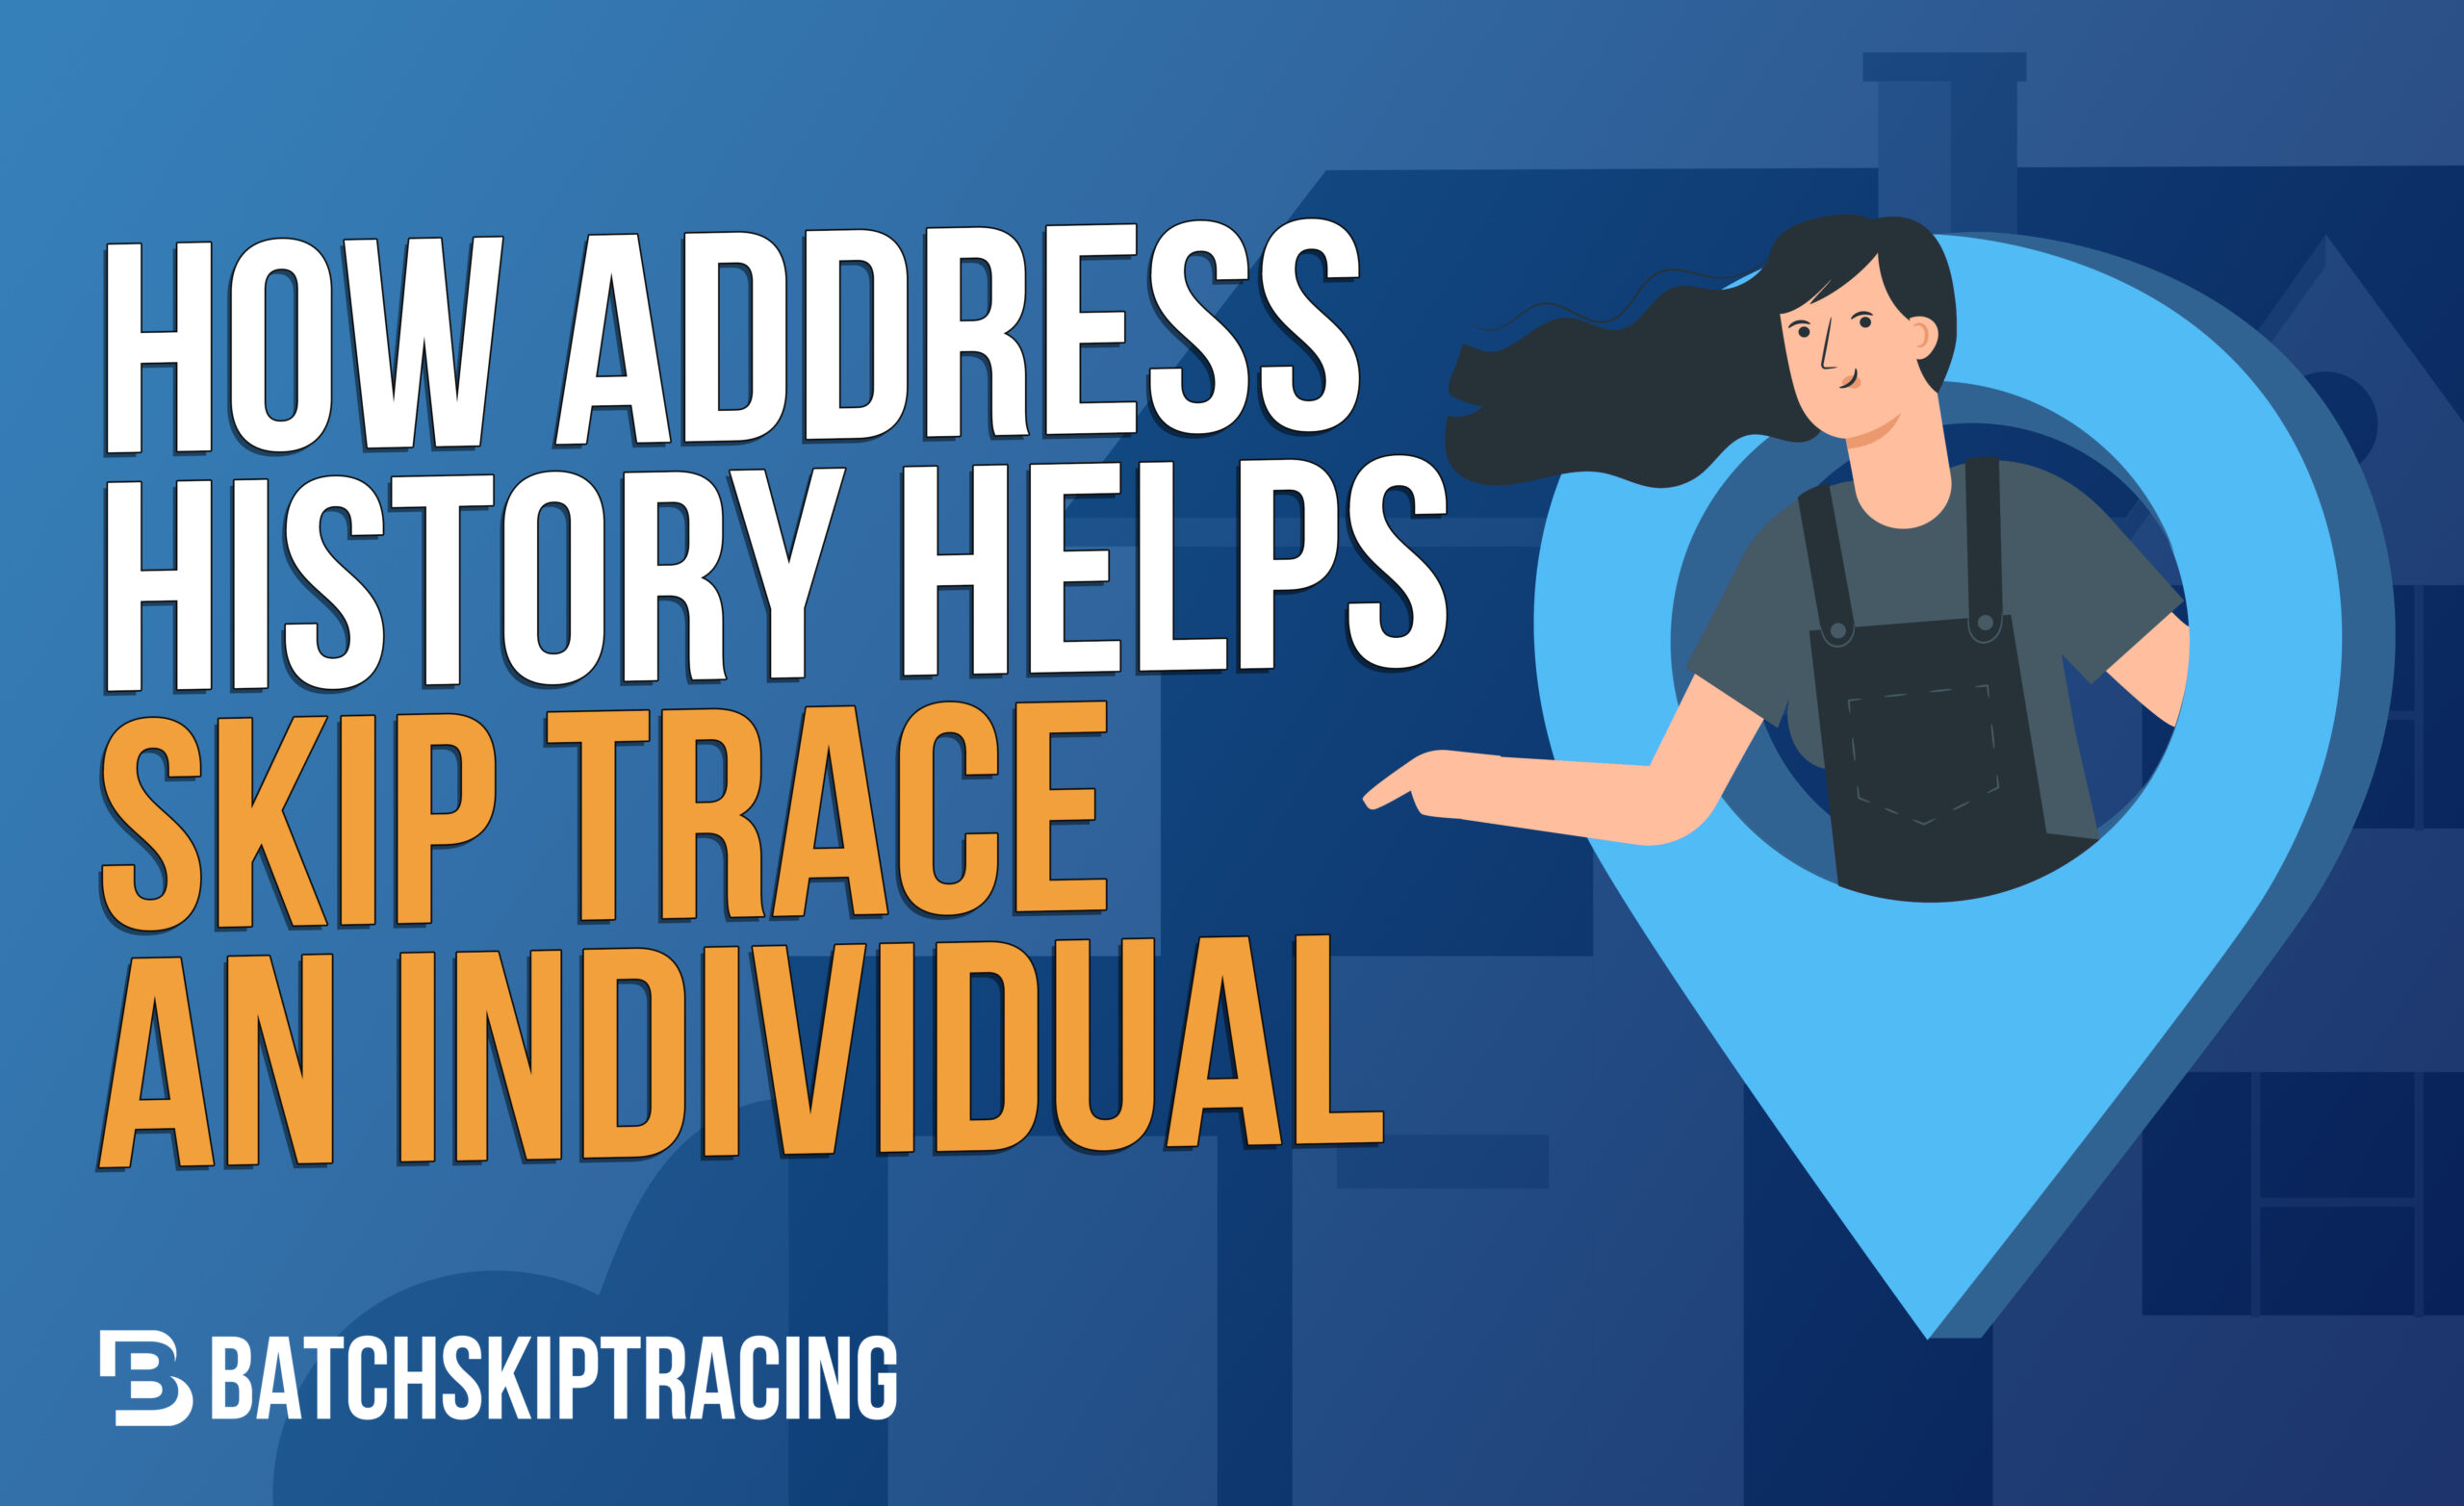 How Address History Helps Skip Trace An Individual